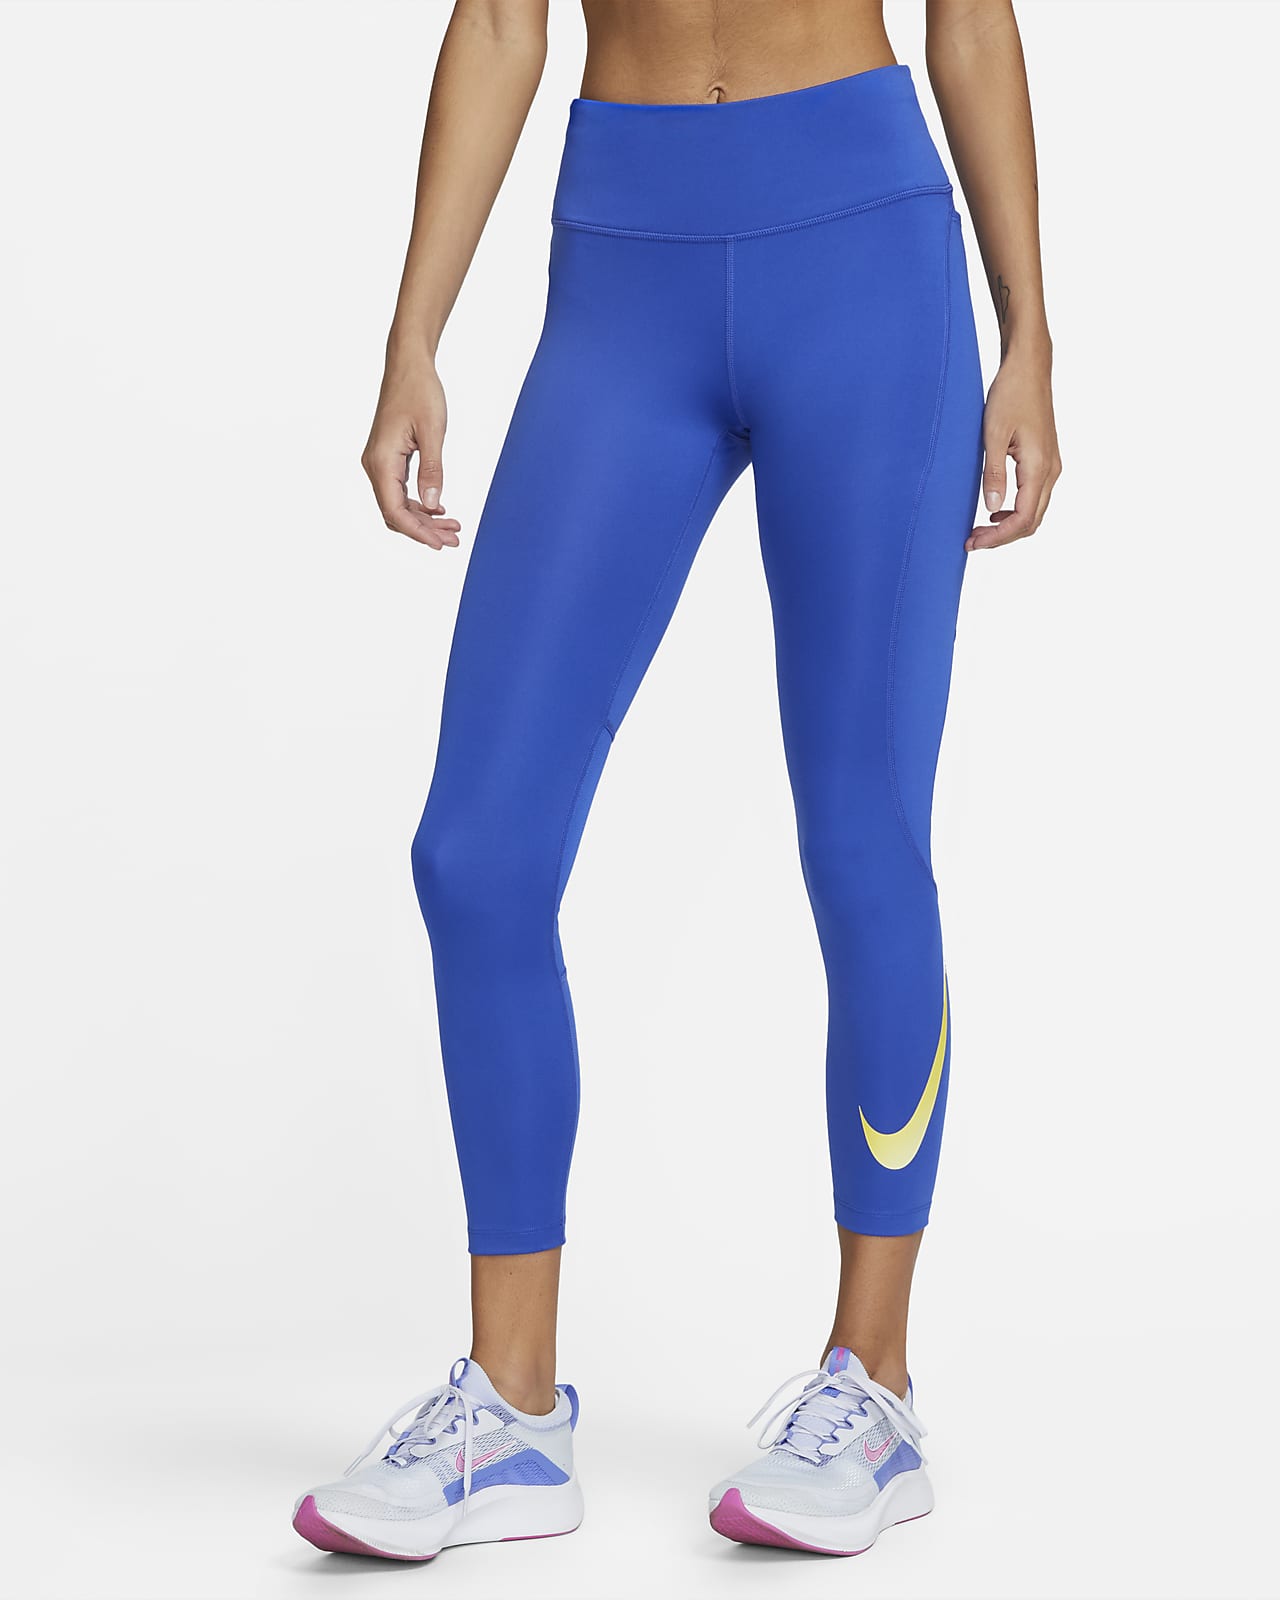 Nike Pro 365 Women's Mid-Rise 7/8 Leggings with Pockets. Nike MY